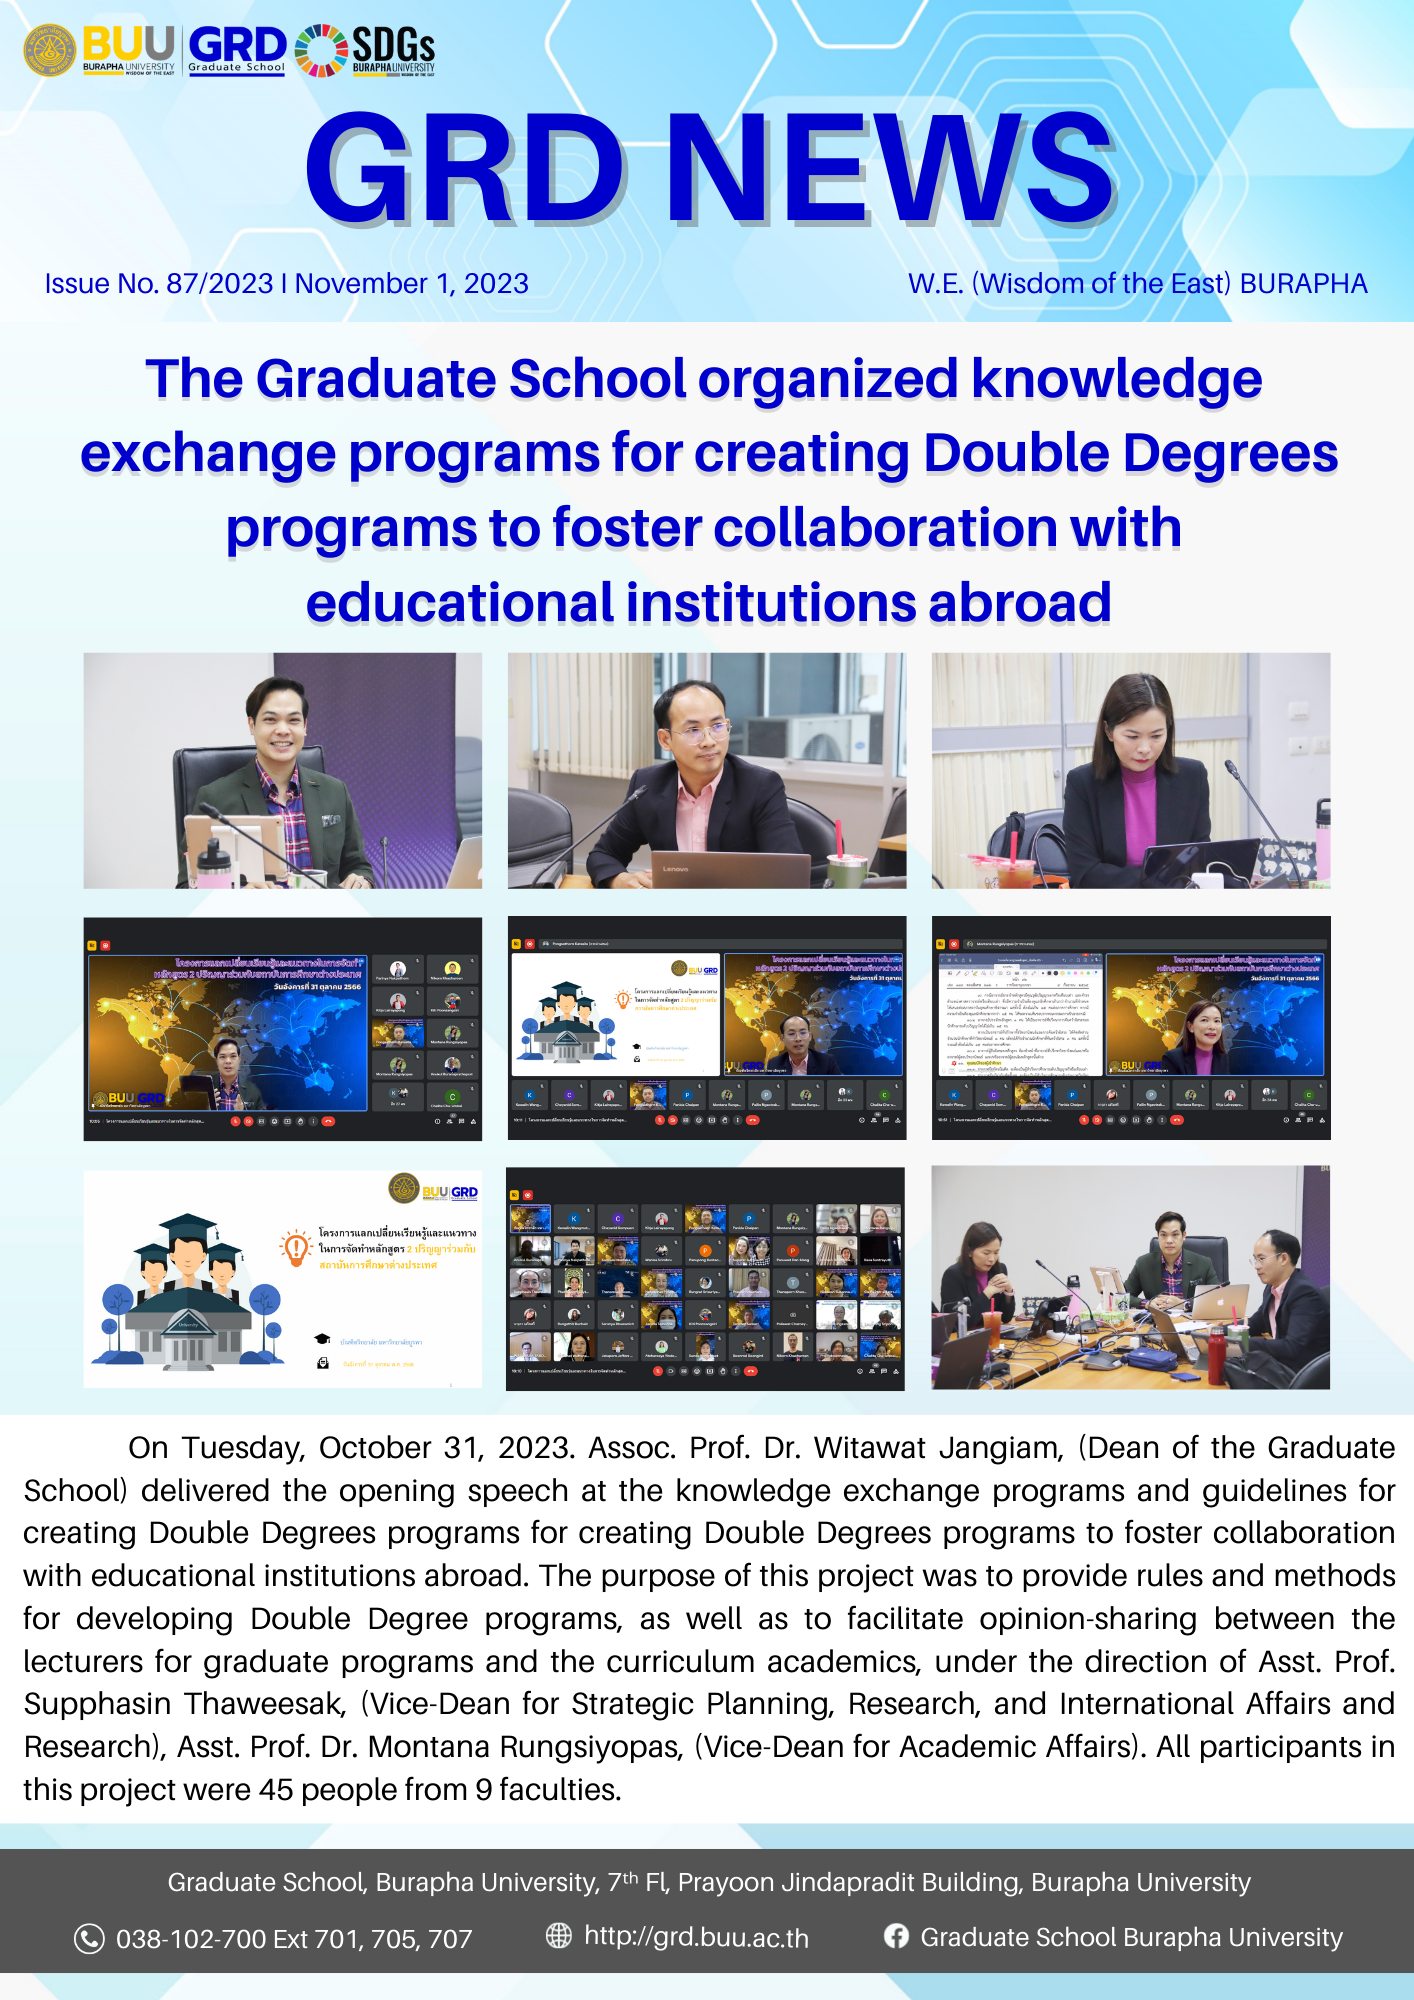 The Graduate School organized knowledge exchange programs for creating Double Degrees programs to foster collaboration with educational institutions abroad